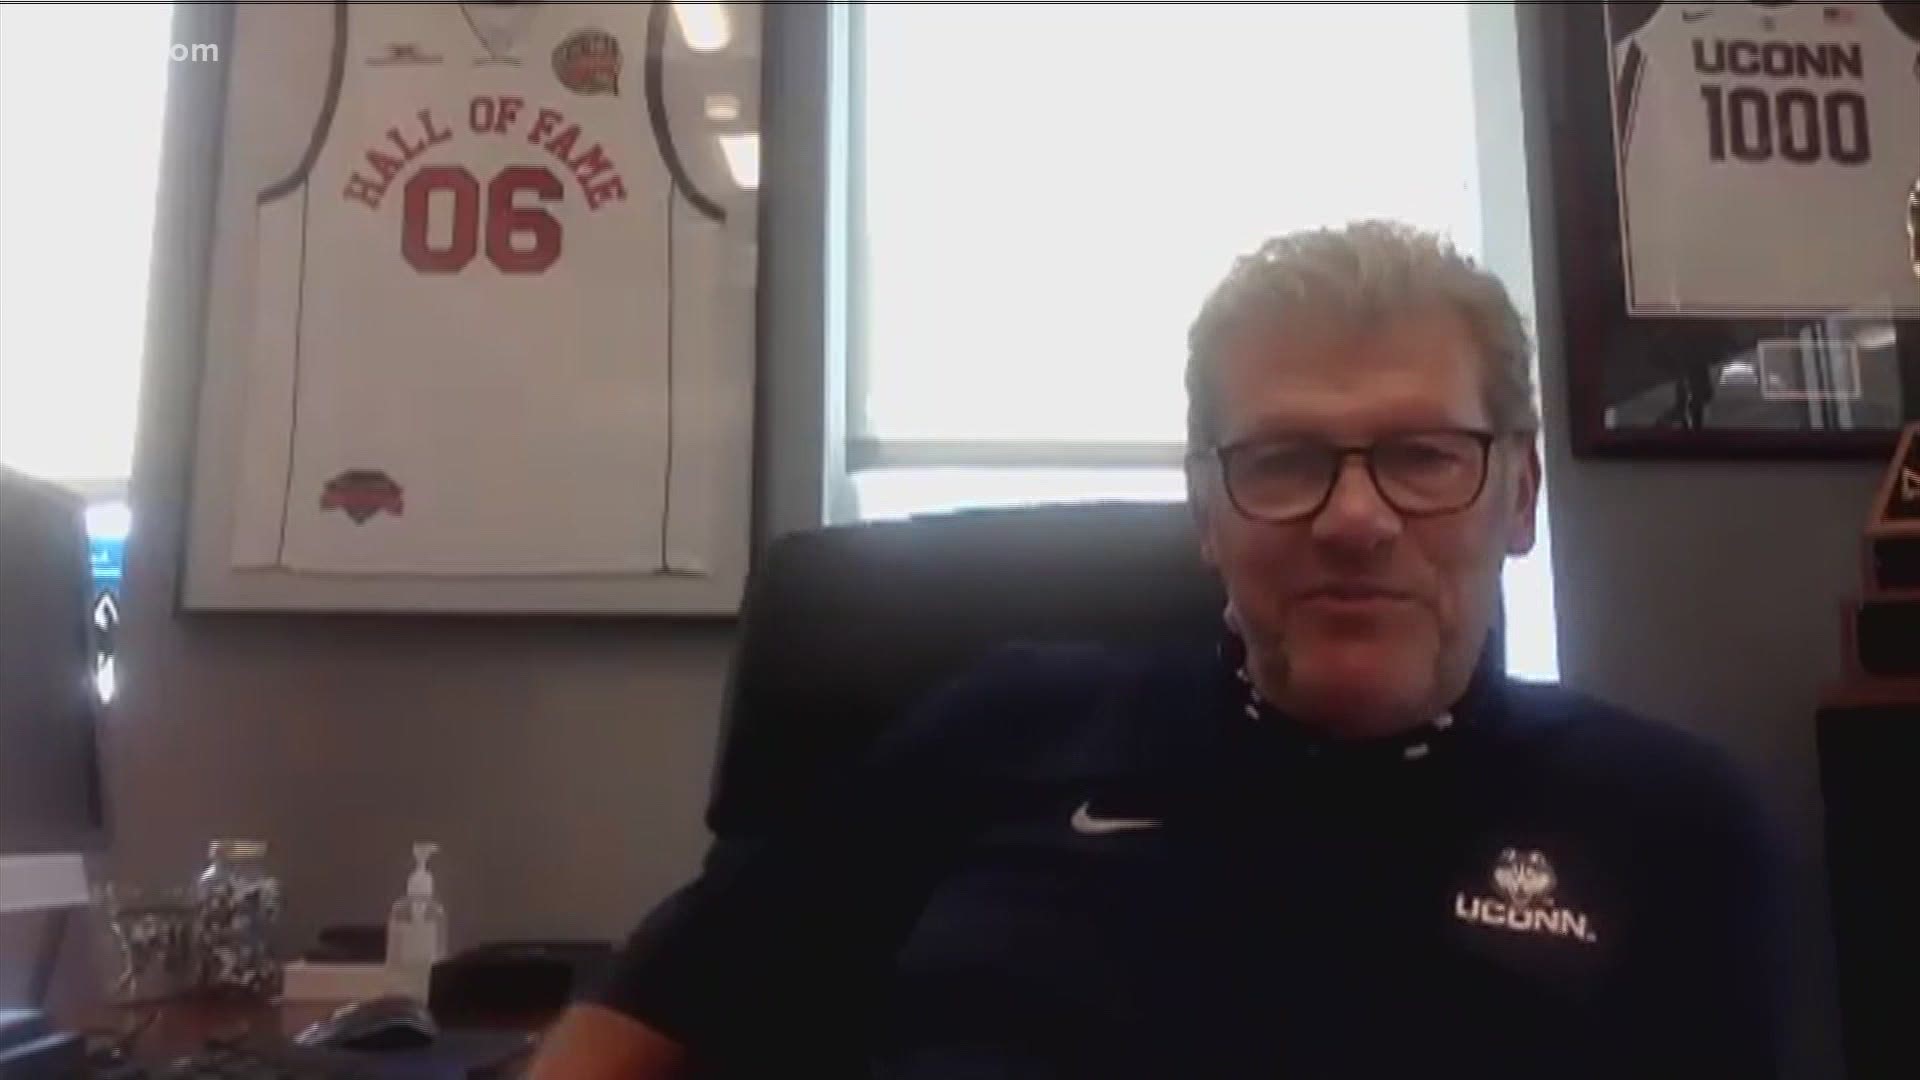 Coach Geno Auriemma spoke with FOX61 about the process of training and preparing his players under COVID-19 restrictions.